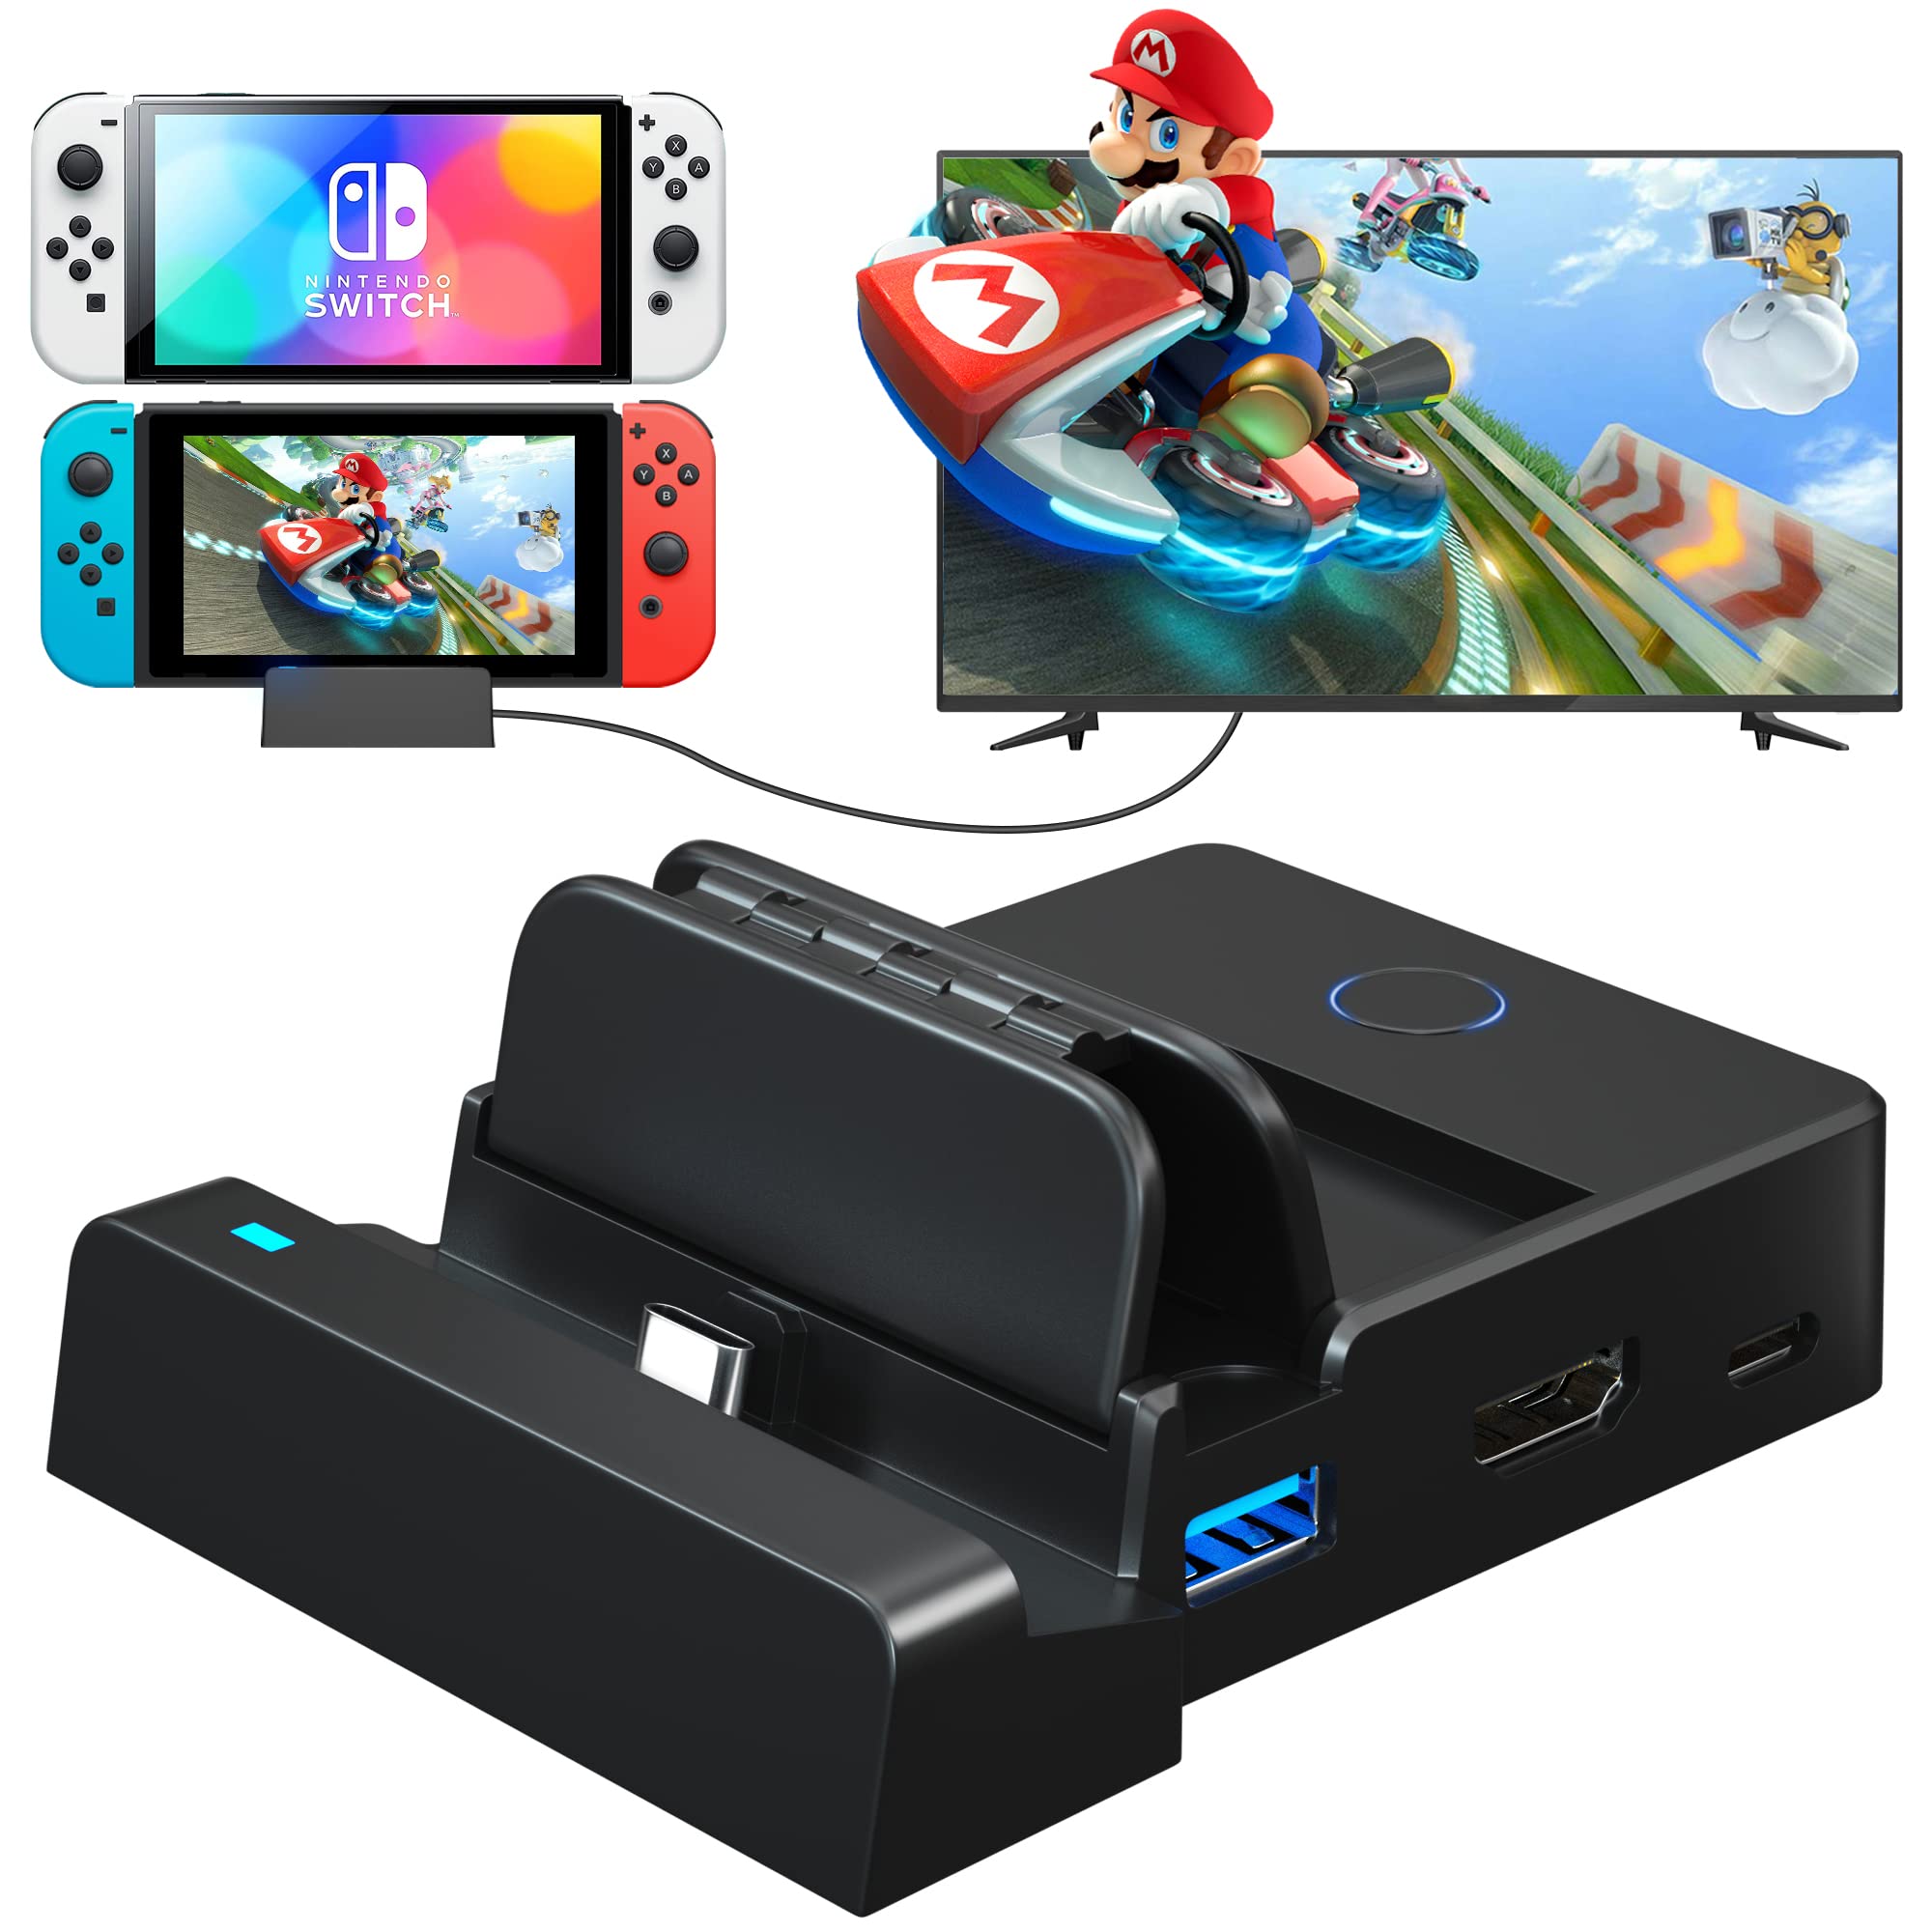 Feirsh Docking Station for Nintendo Switch, Foldable Switch Dock Nintendo Switch TV Dock with 4K HDMI Output, Replacement for Official Nintendo Switch Dock